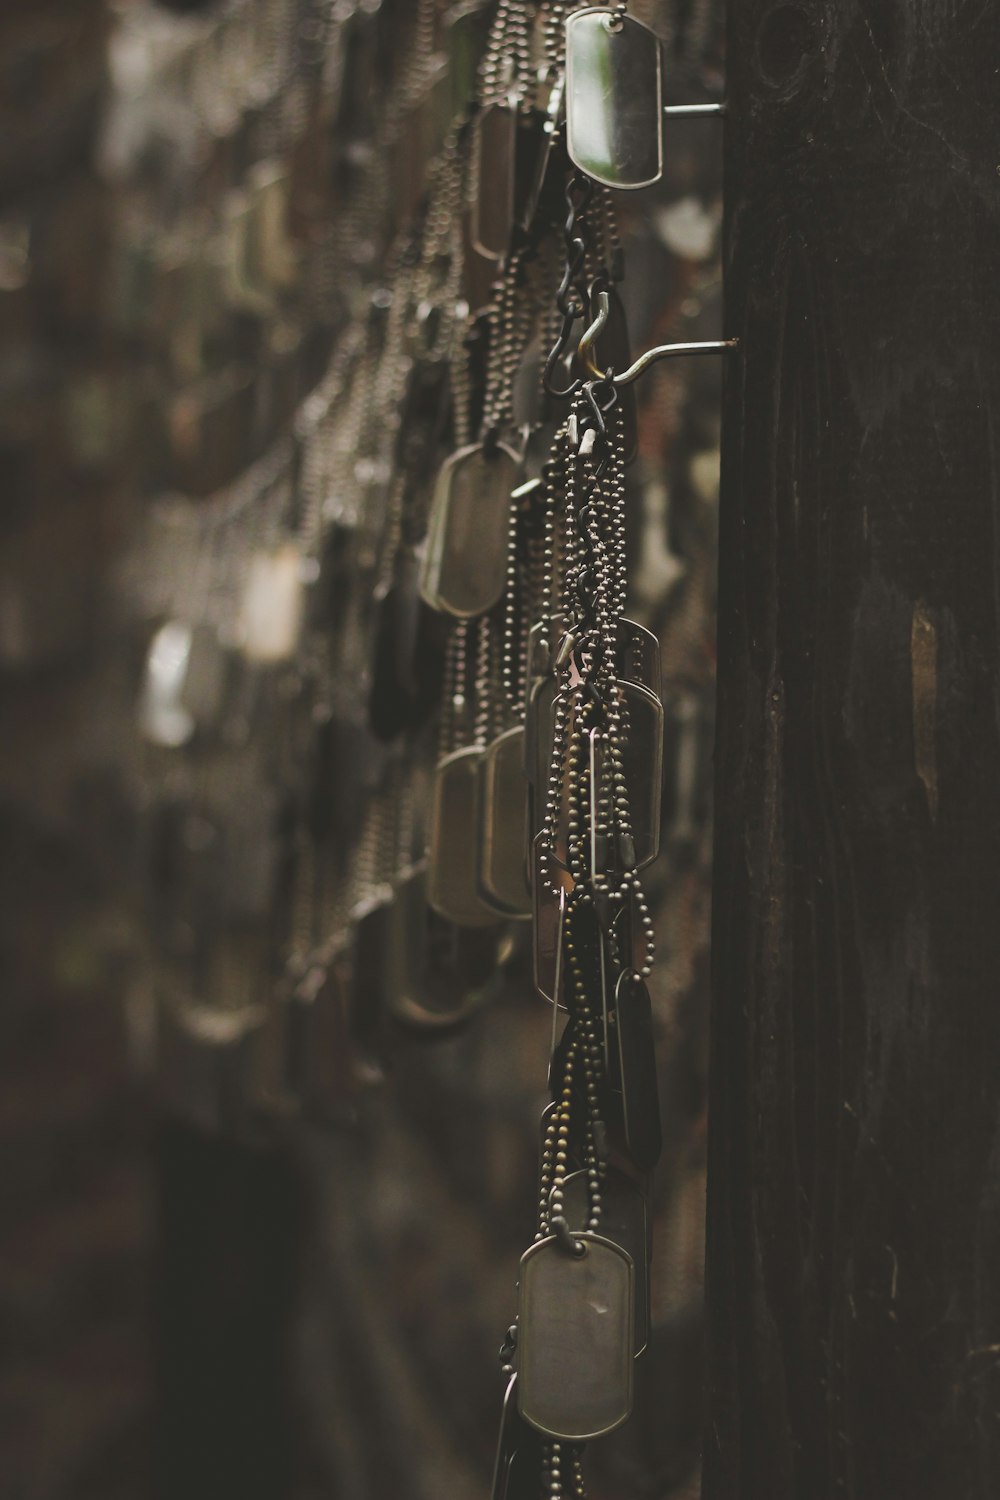 silver-colored god tags hanging on hooks shallow focus photography